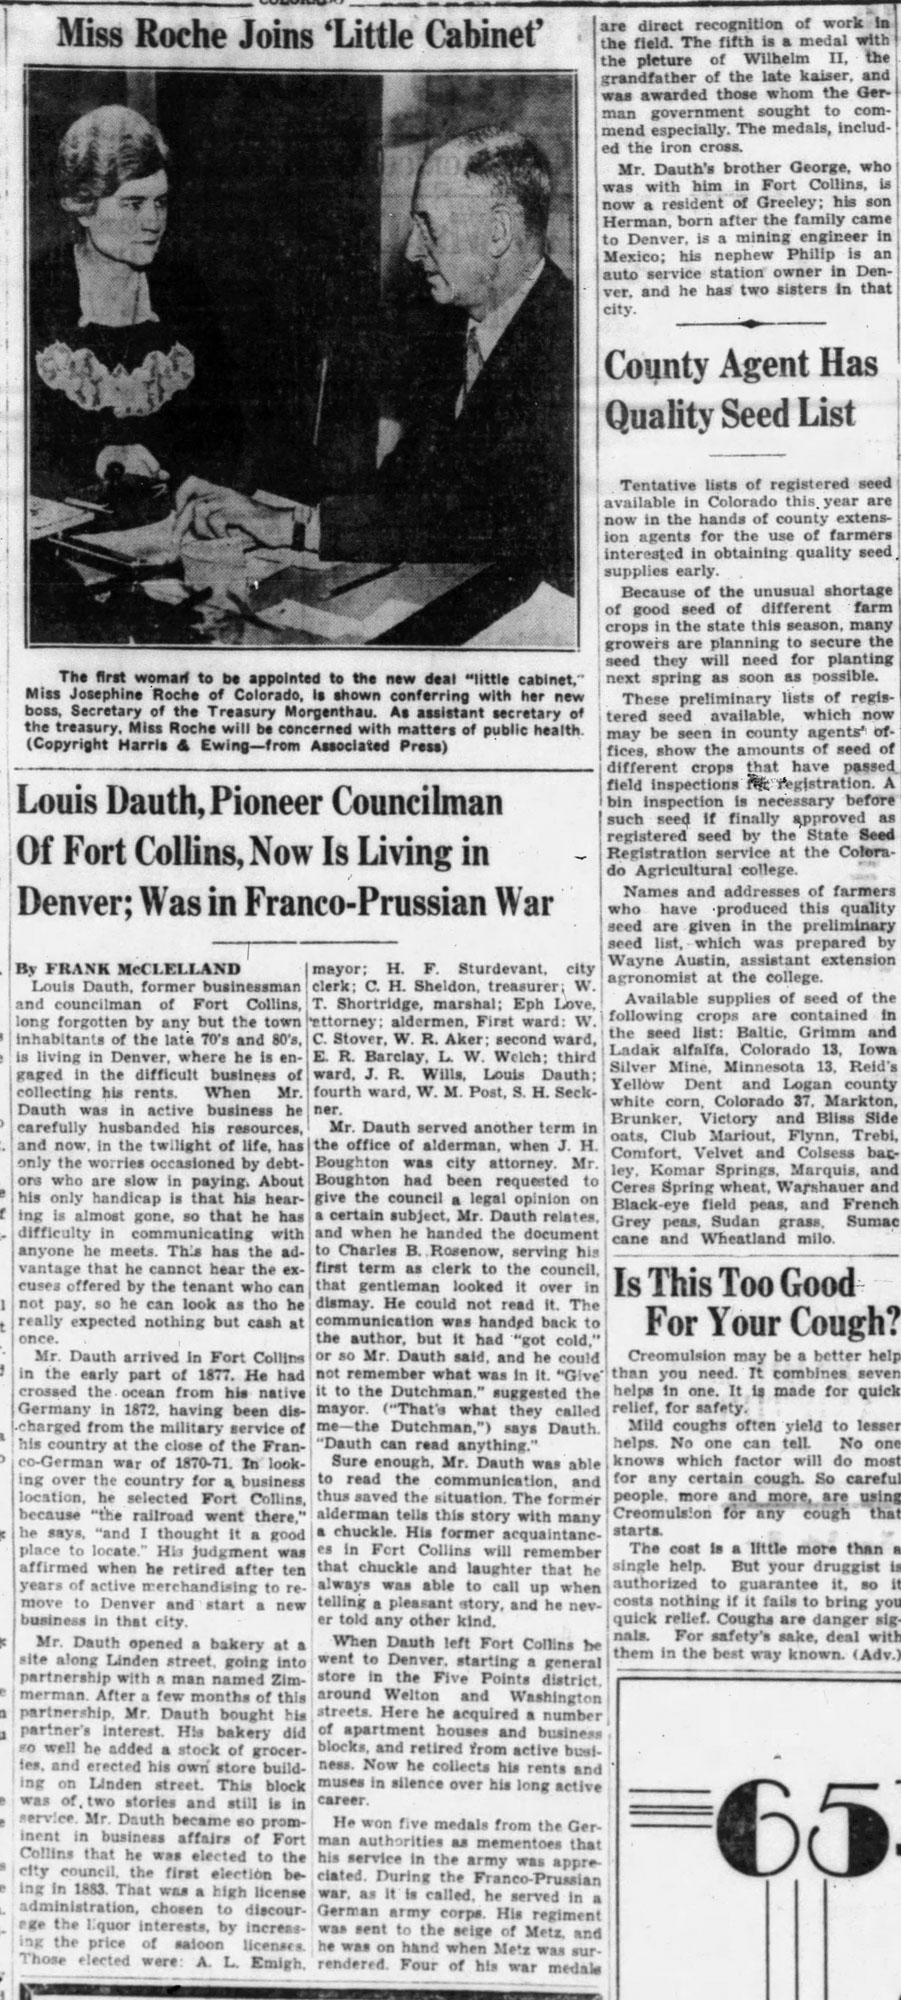 Dauth Family Archive - 1934-11-19 - The Fort Collins Express Courier - Louis Dauth Biography